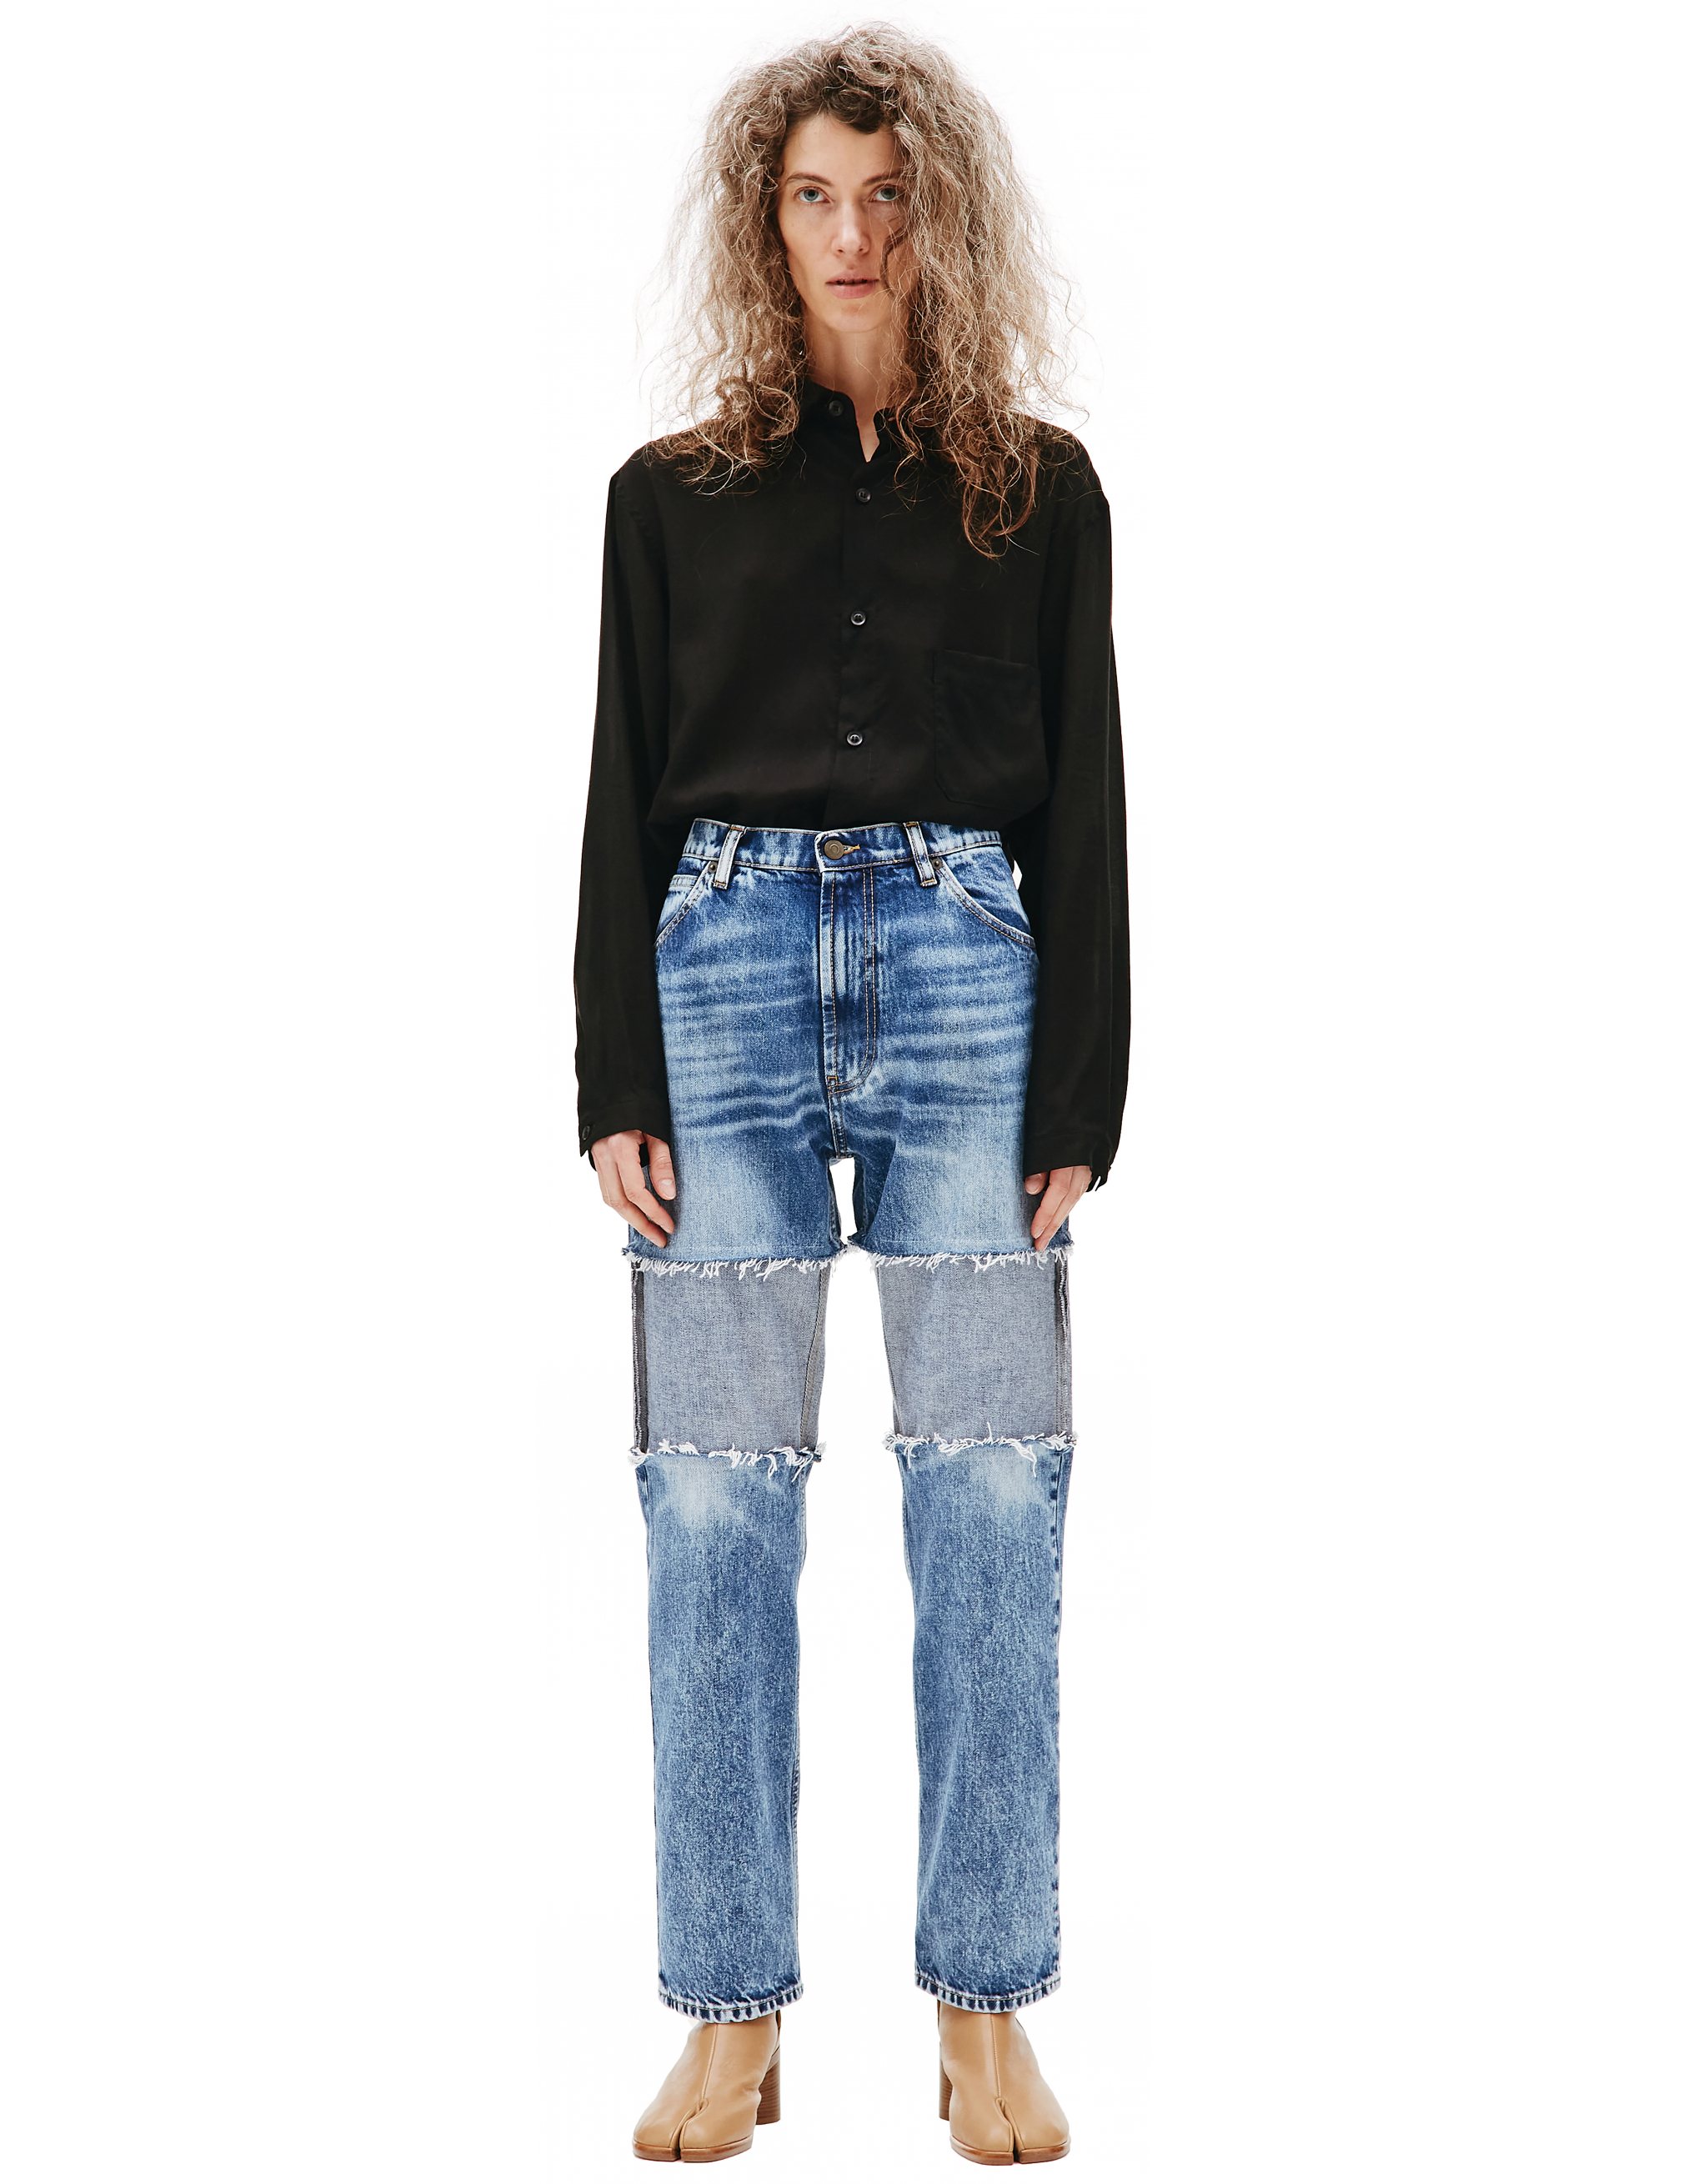 650 52. Rabbit b reconstructed Jeans.